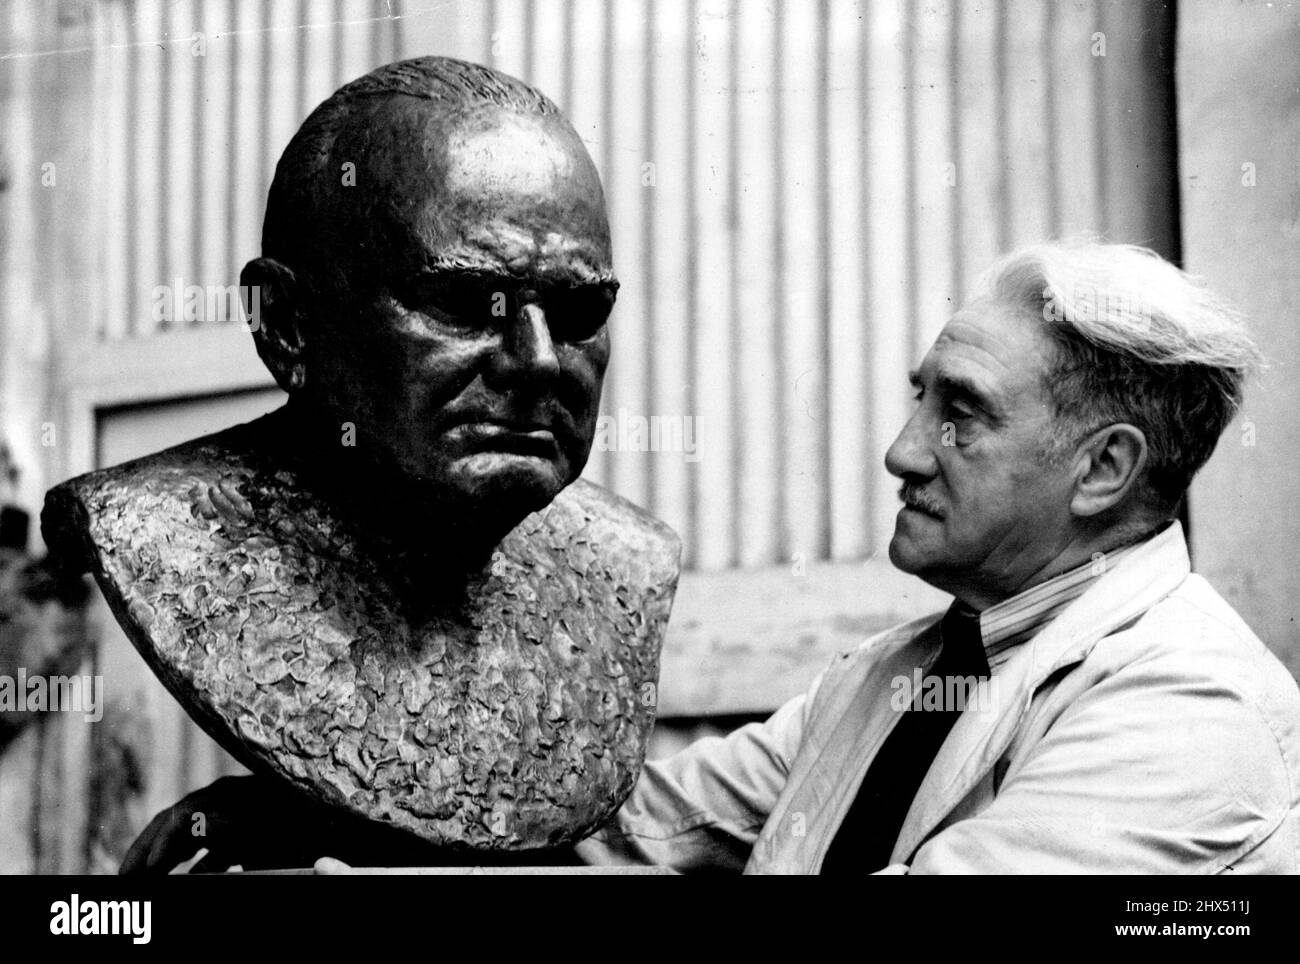 Almost A State Secret -- Benno Elkan at work on his 'secret' bust of Winston Churchill. Mr. Churchill is a hard man to persuade against his will, but Mrs. Churchill did it and the result of her efforts will be seen next January in the Wildenstein Gallery, London, when a bronze bust of the great war-time leader is shown publicly. The bust, a personal tribute to Churchill, has been seven years in the making for most of that time without the knowledge of Mrs. Churchill or her husband. November 29, 1949. (Photo by Reuterphoto). Stock Photo